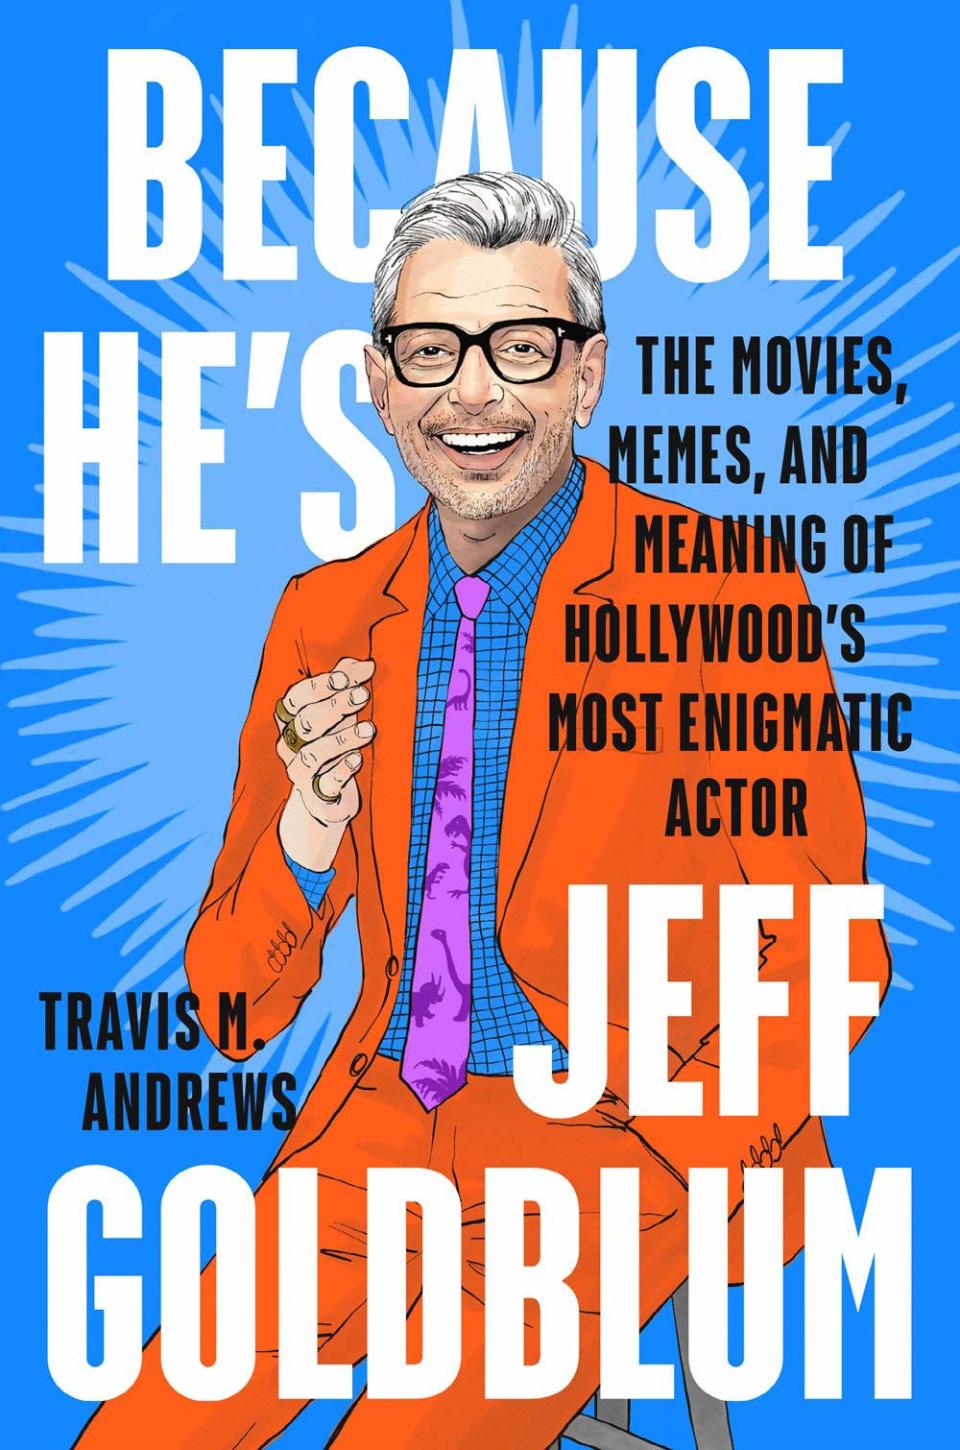 Because He's Jeff Goldblum is available May 4. (Photo: Plume)